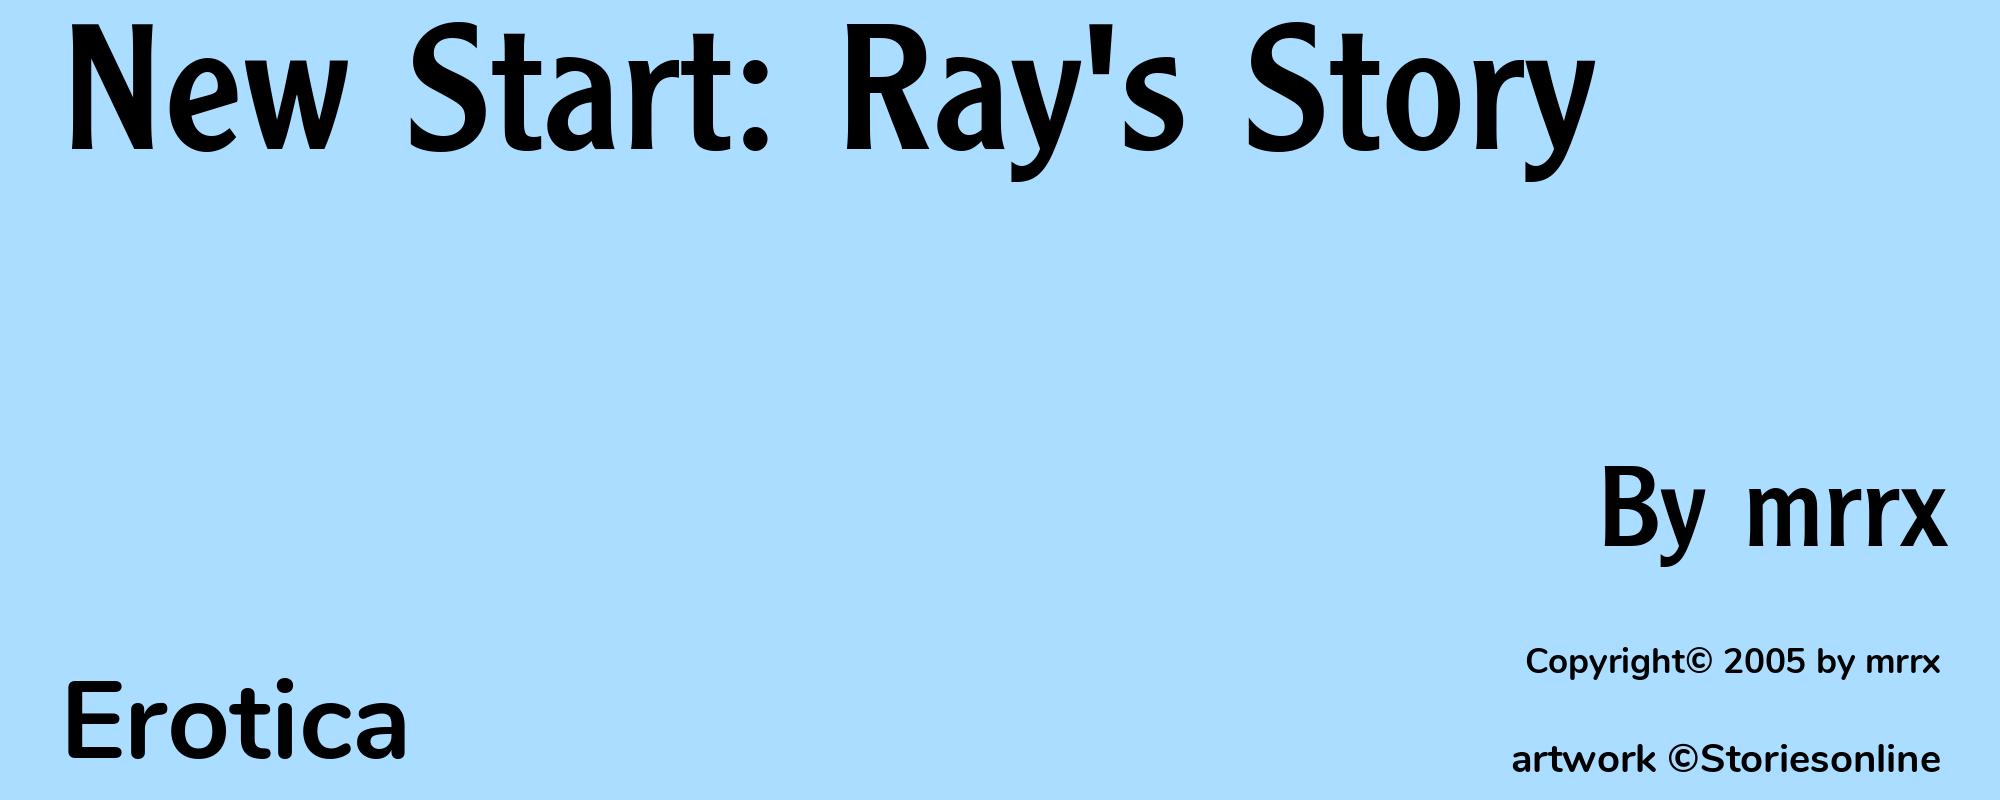 New Start: Ray's Story - Cover